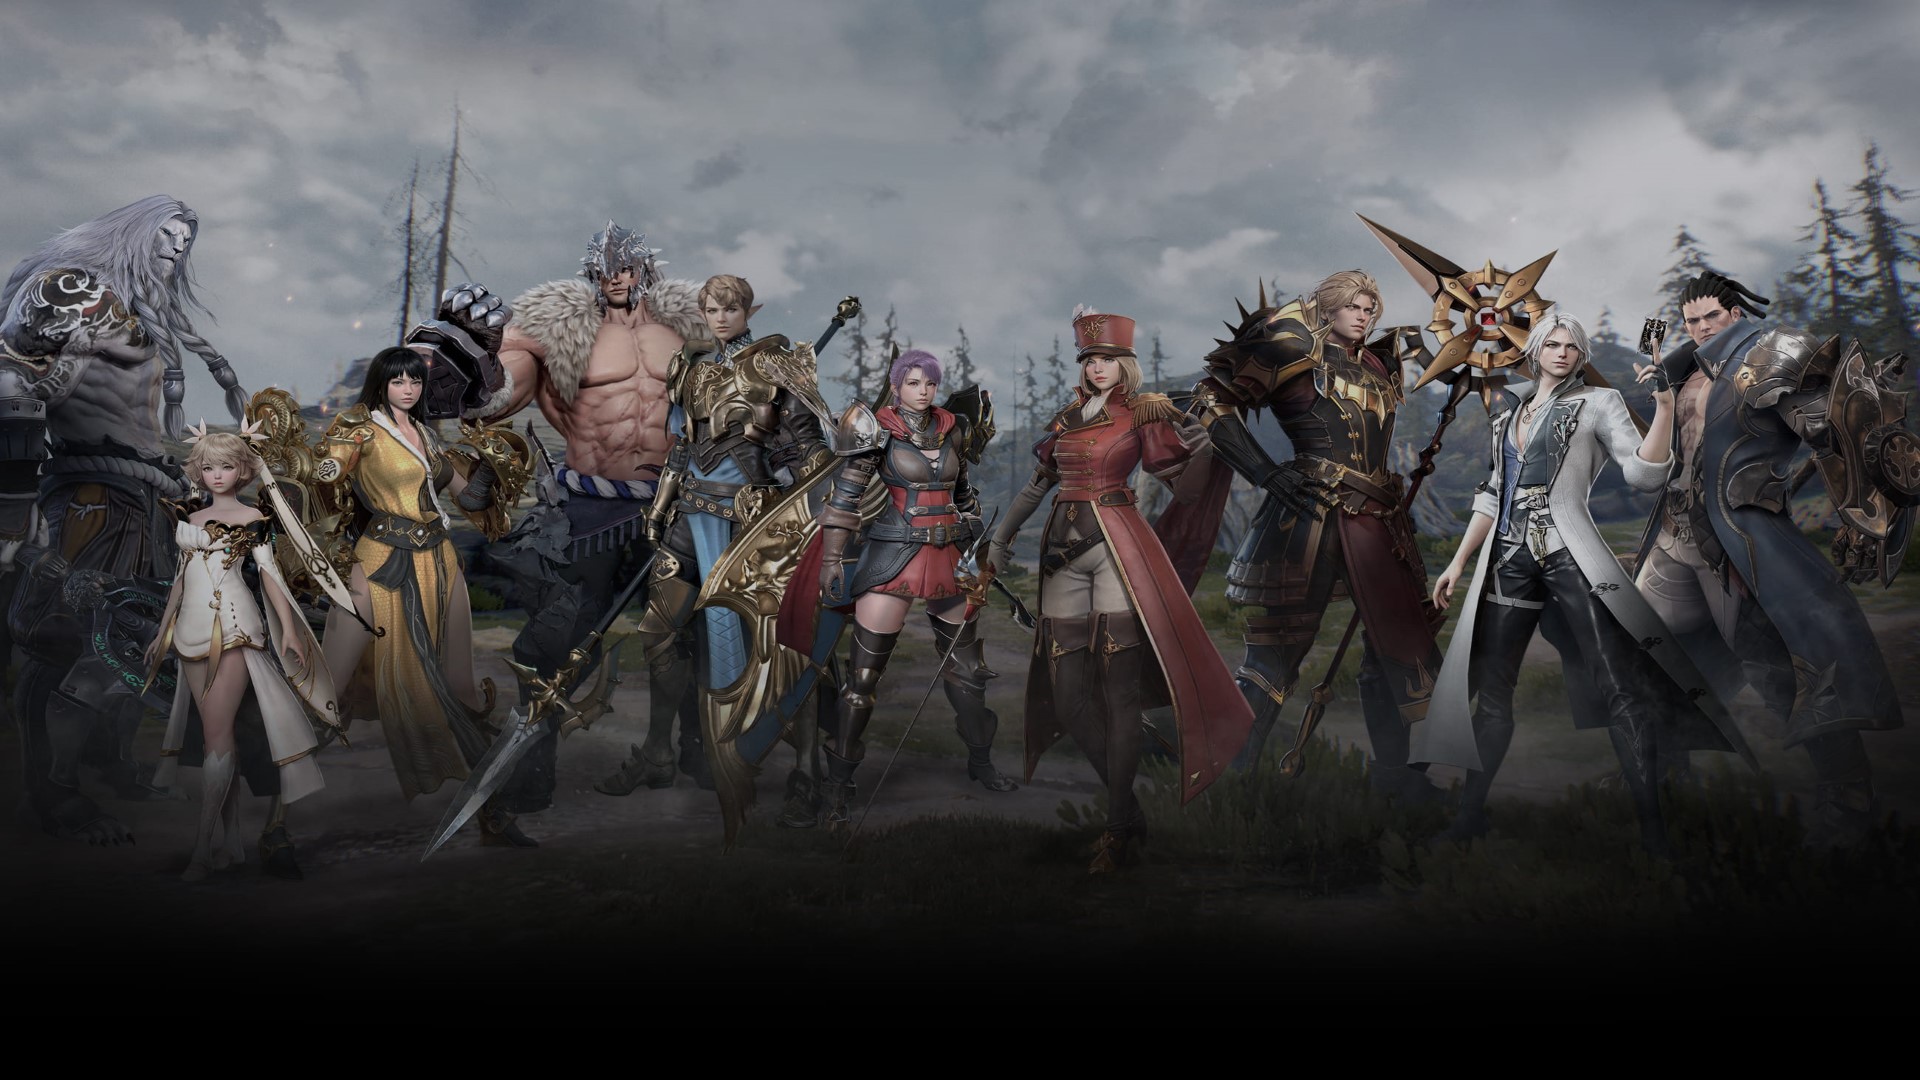 Best knight games: Seven Knights 2. Image shows a large group of characters from the game.